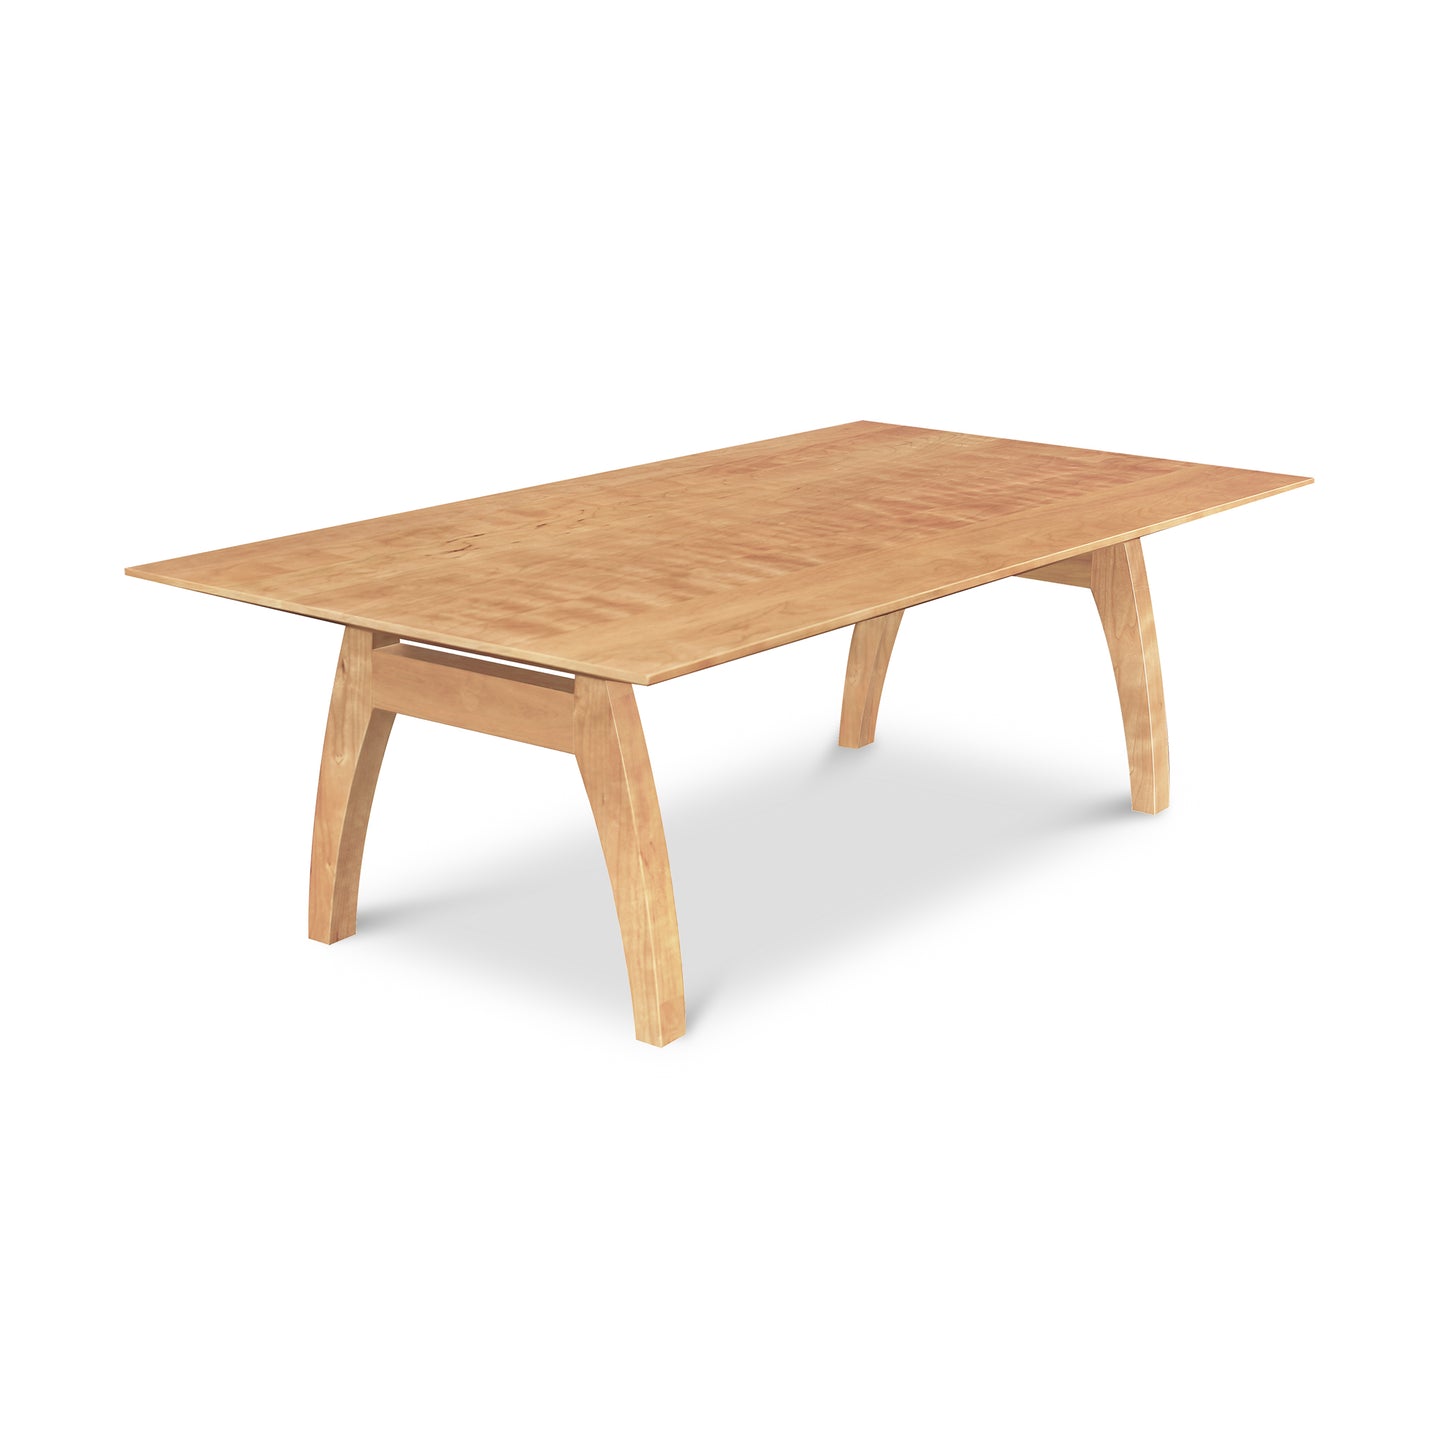 A handmade Vermont Modern Trestle Coffee Table with a wooden top and legs, crafted in Vermont by Lyndon Furniture.